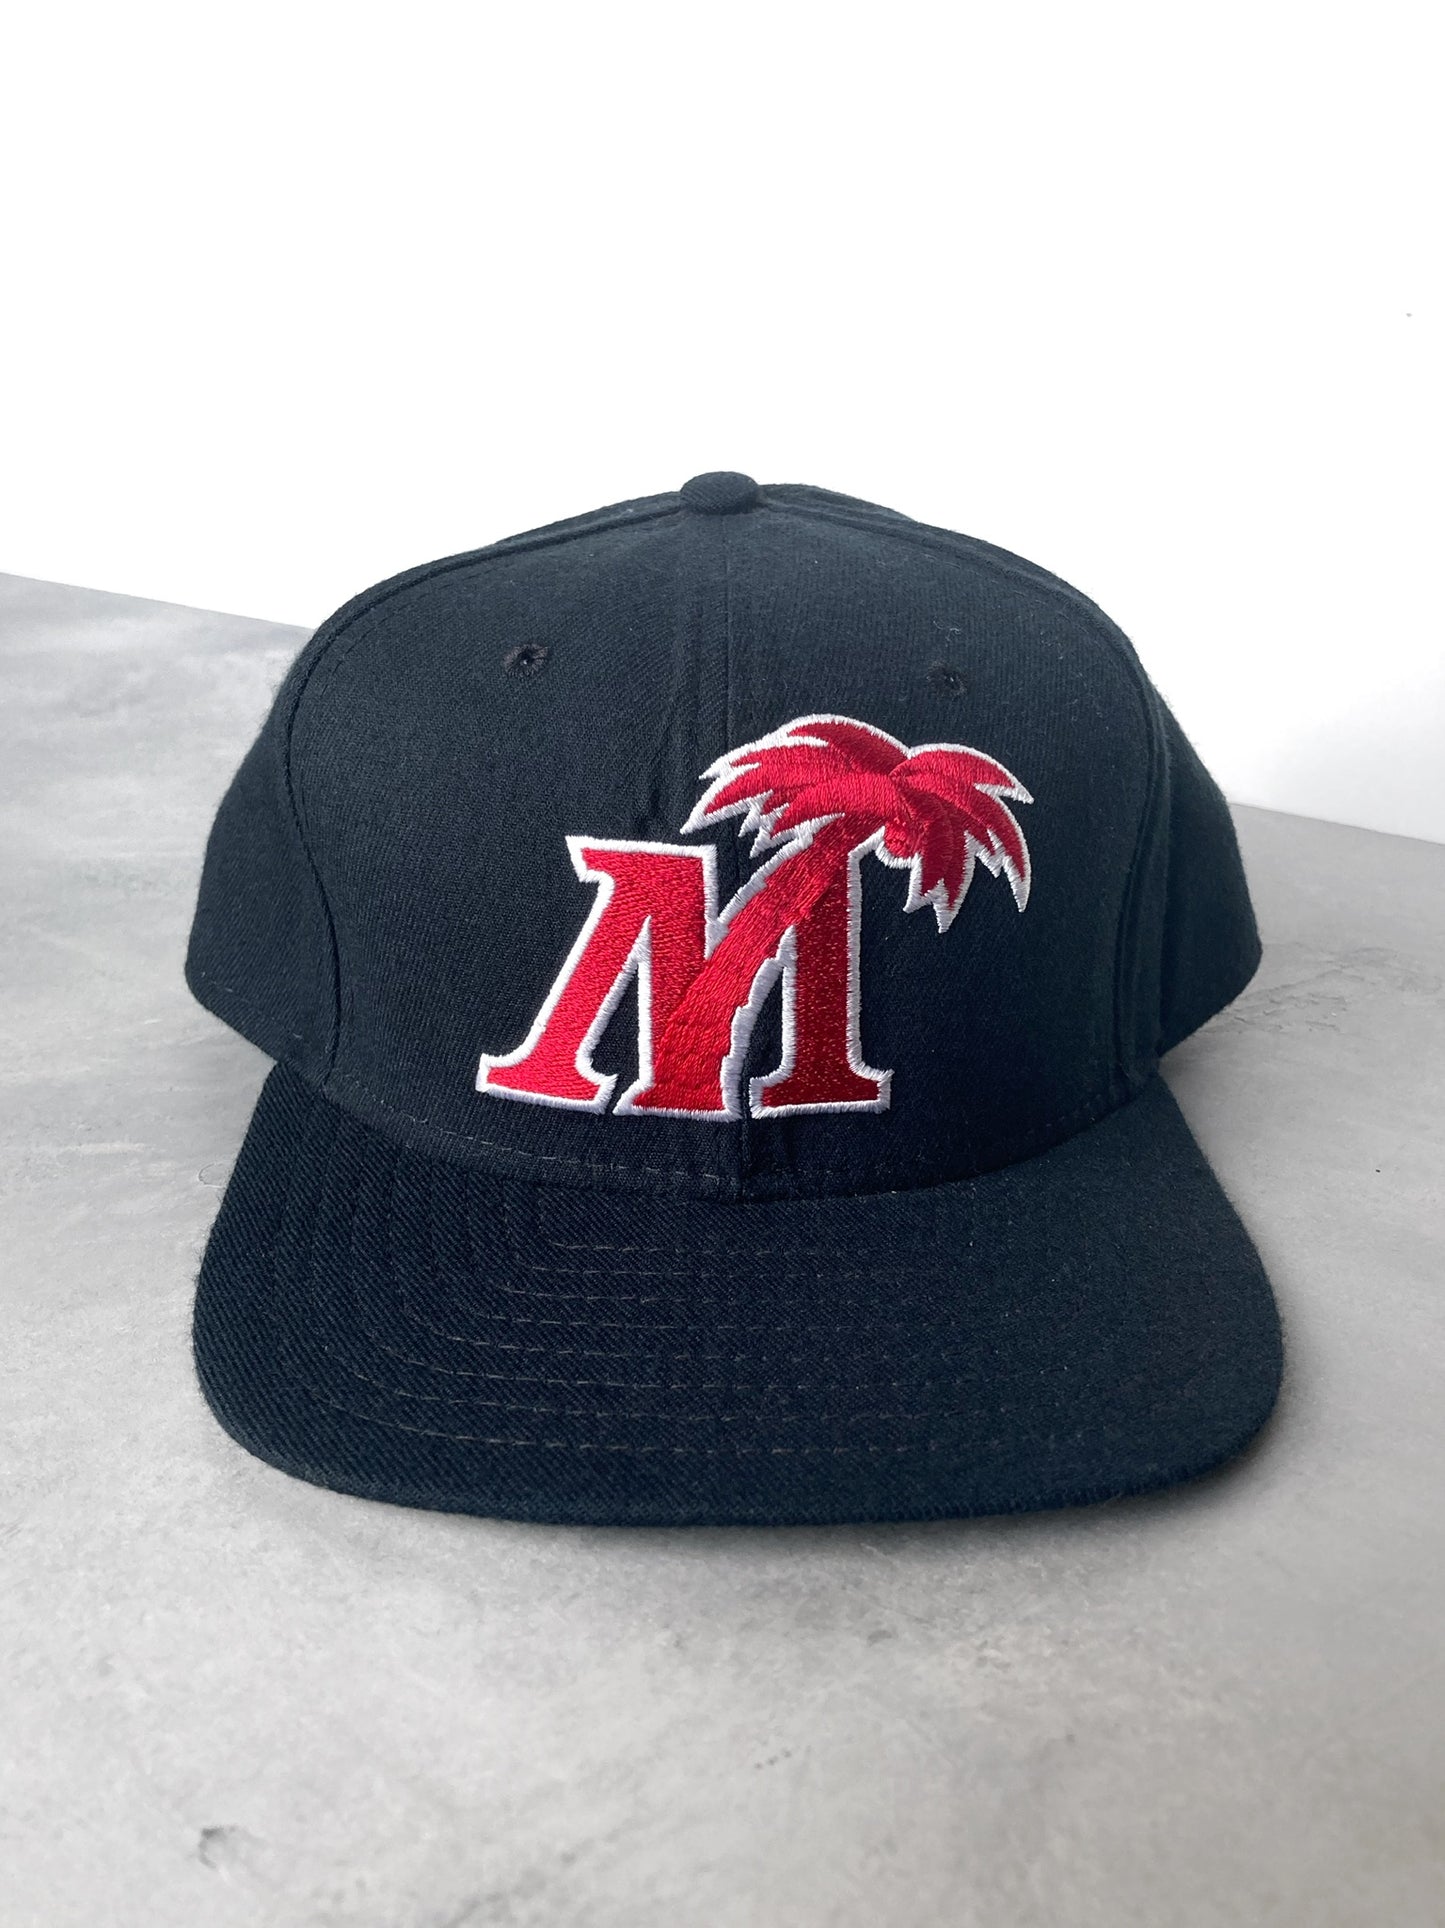 Fort Meyers Miracle Baseball Hat 90's